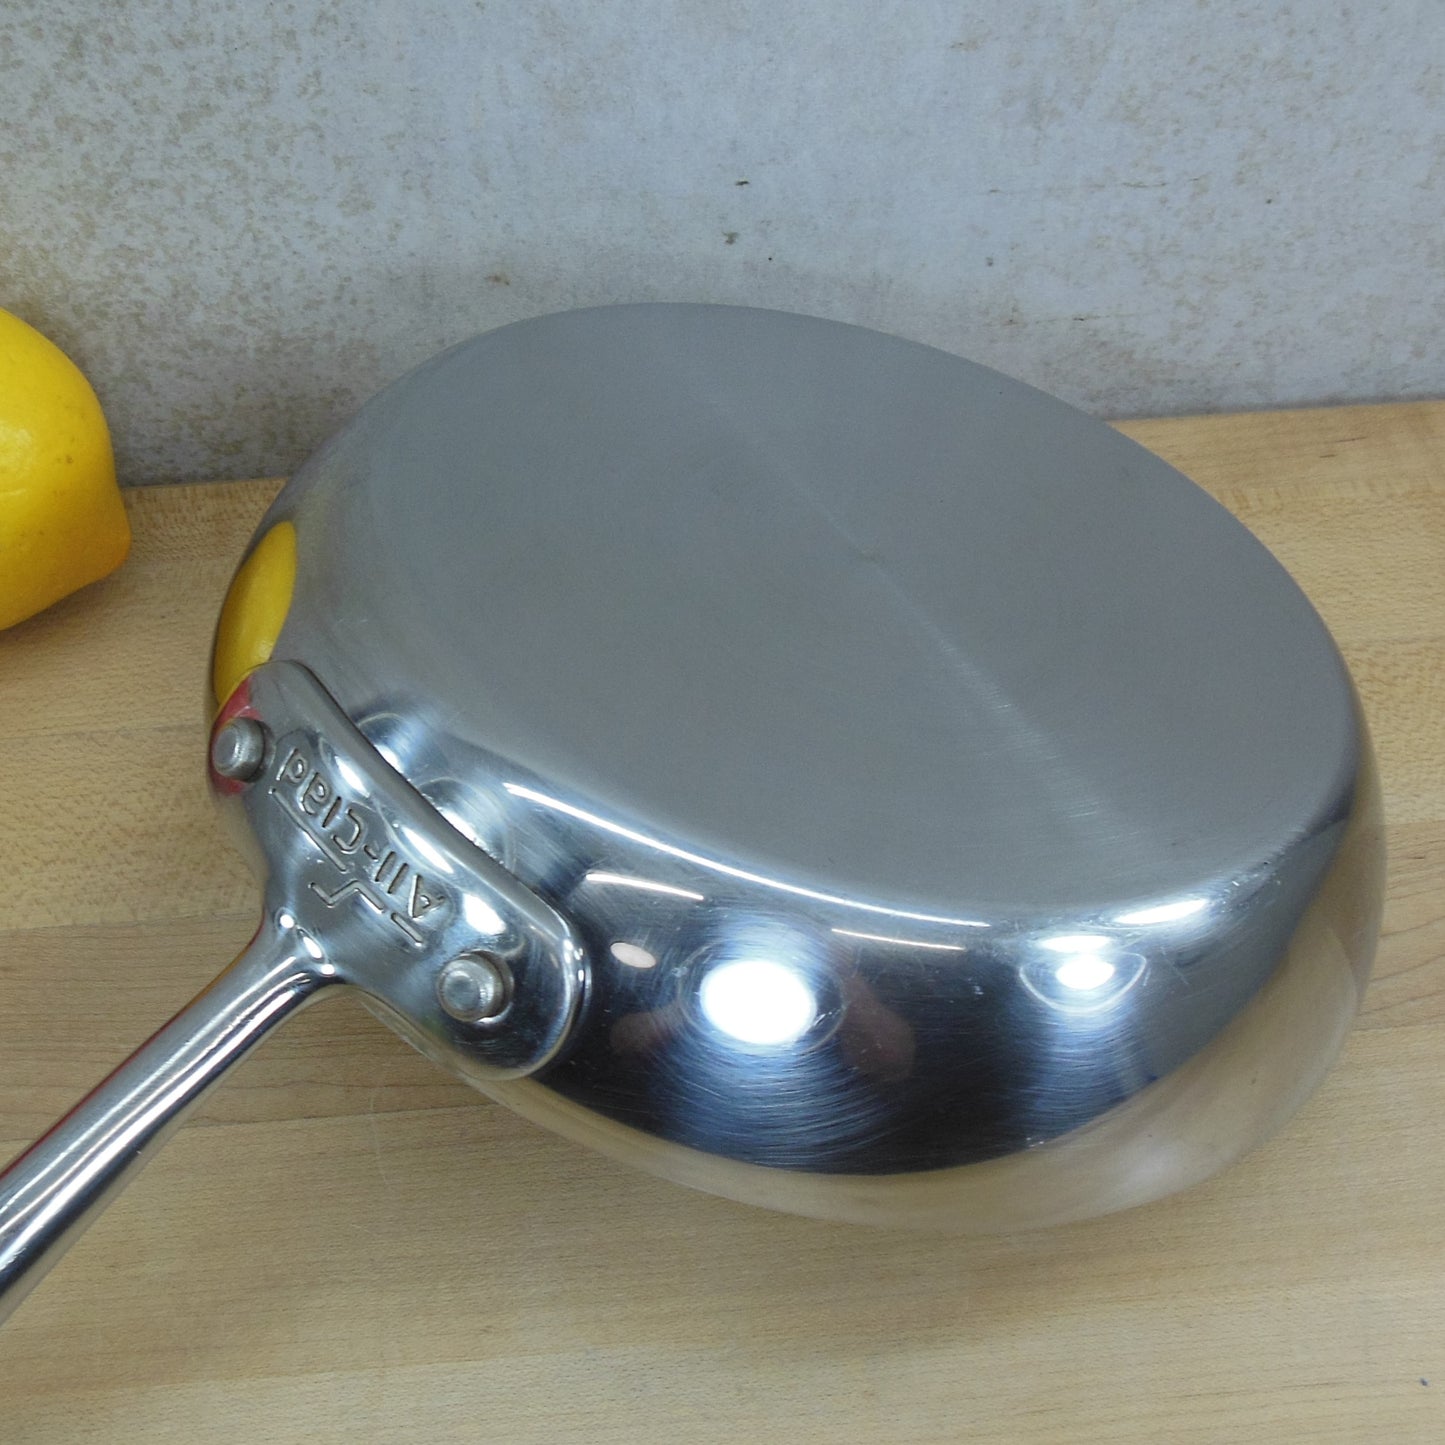 All-Clad USA Tri-Ply Stainless French Skillet 7-1/2" cleaned